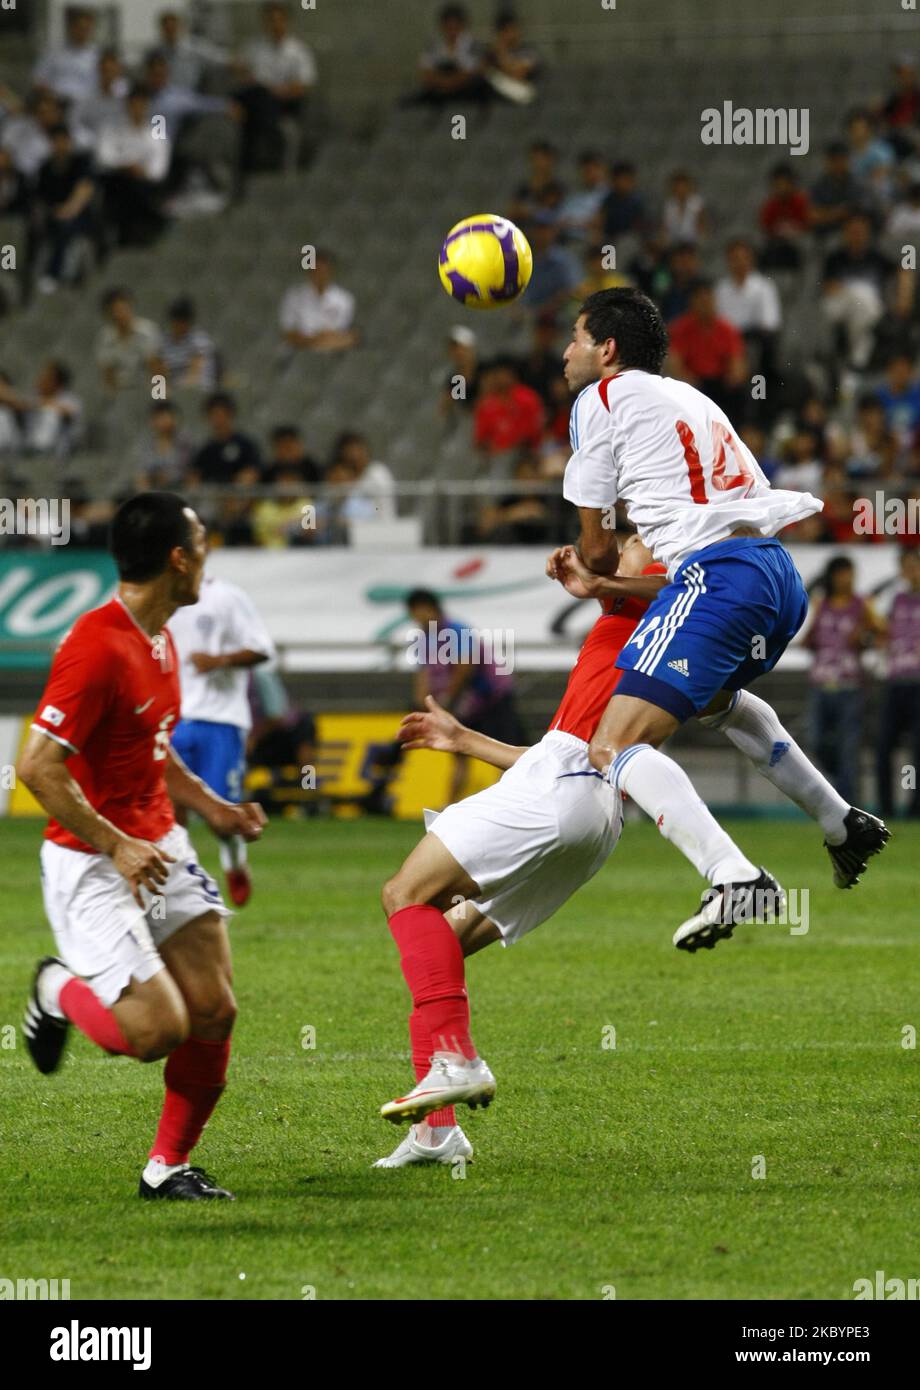 Park Chu-Young(under), South Korea, and Antolin Alcaraz, Paraguay, compete for the ball during the international friendly match between South Korea and Paraguay at Seoul Worldcup stadium on August 12, 2009 in Seoul, South Korea. (Photo by Seung-il Ryu/NurPhoto) Stock Photo